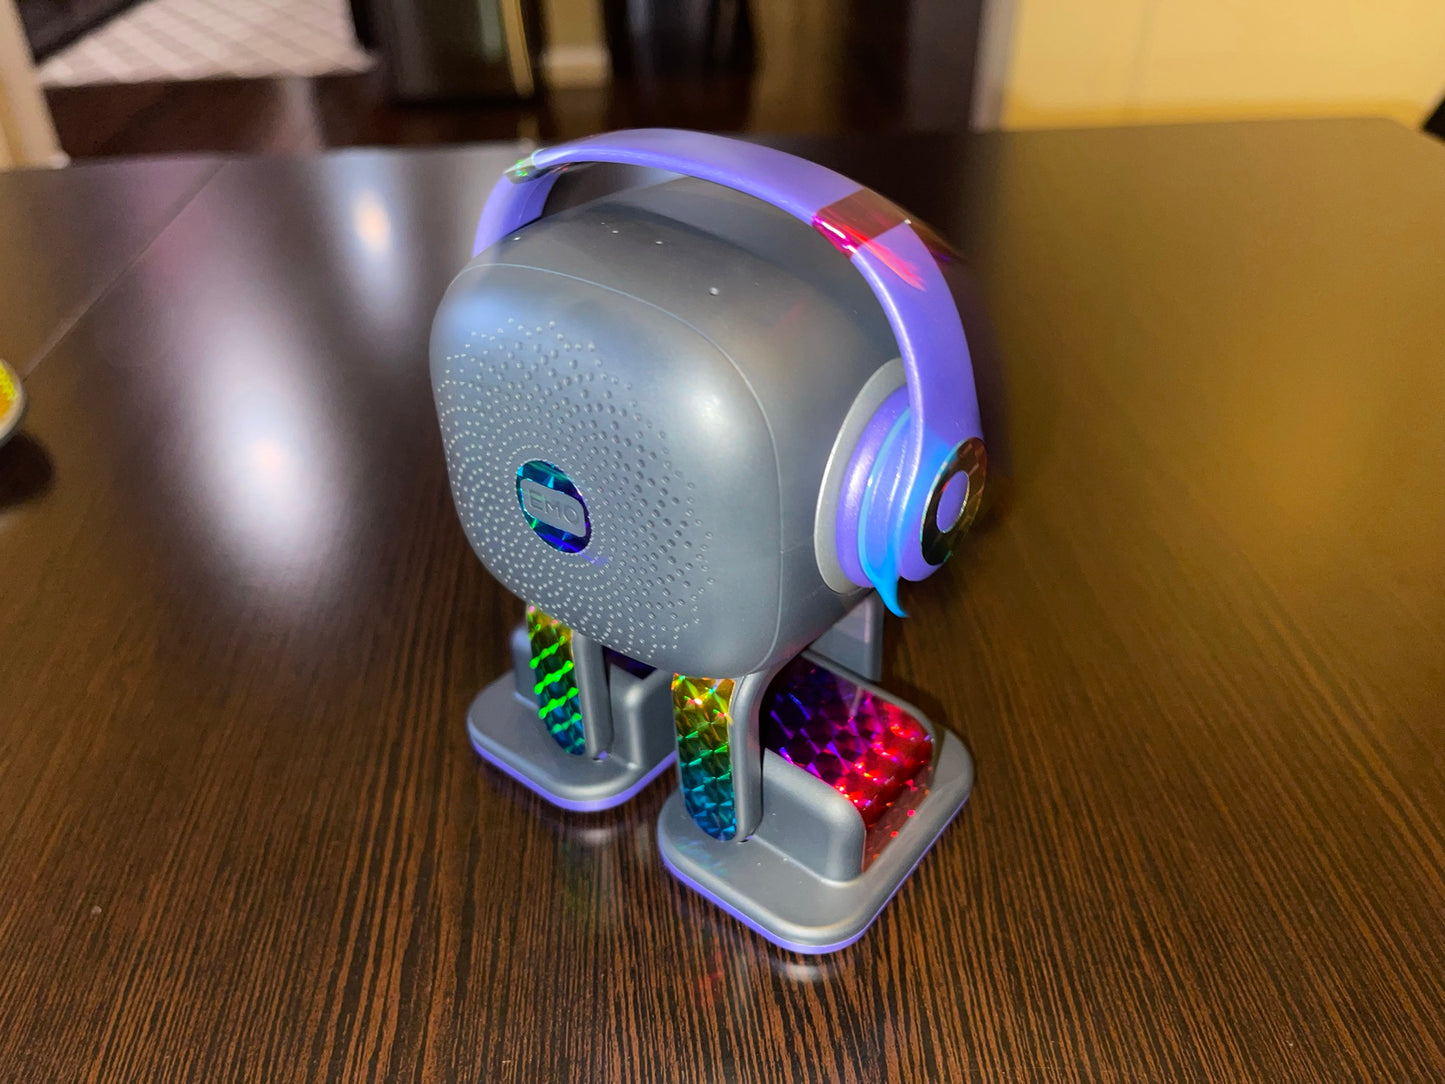 EMO Pet Robot Chrome and Glitter Decals